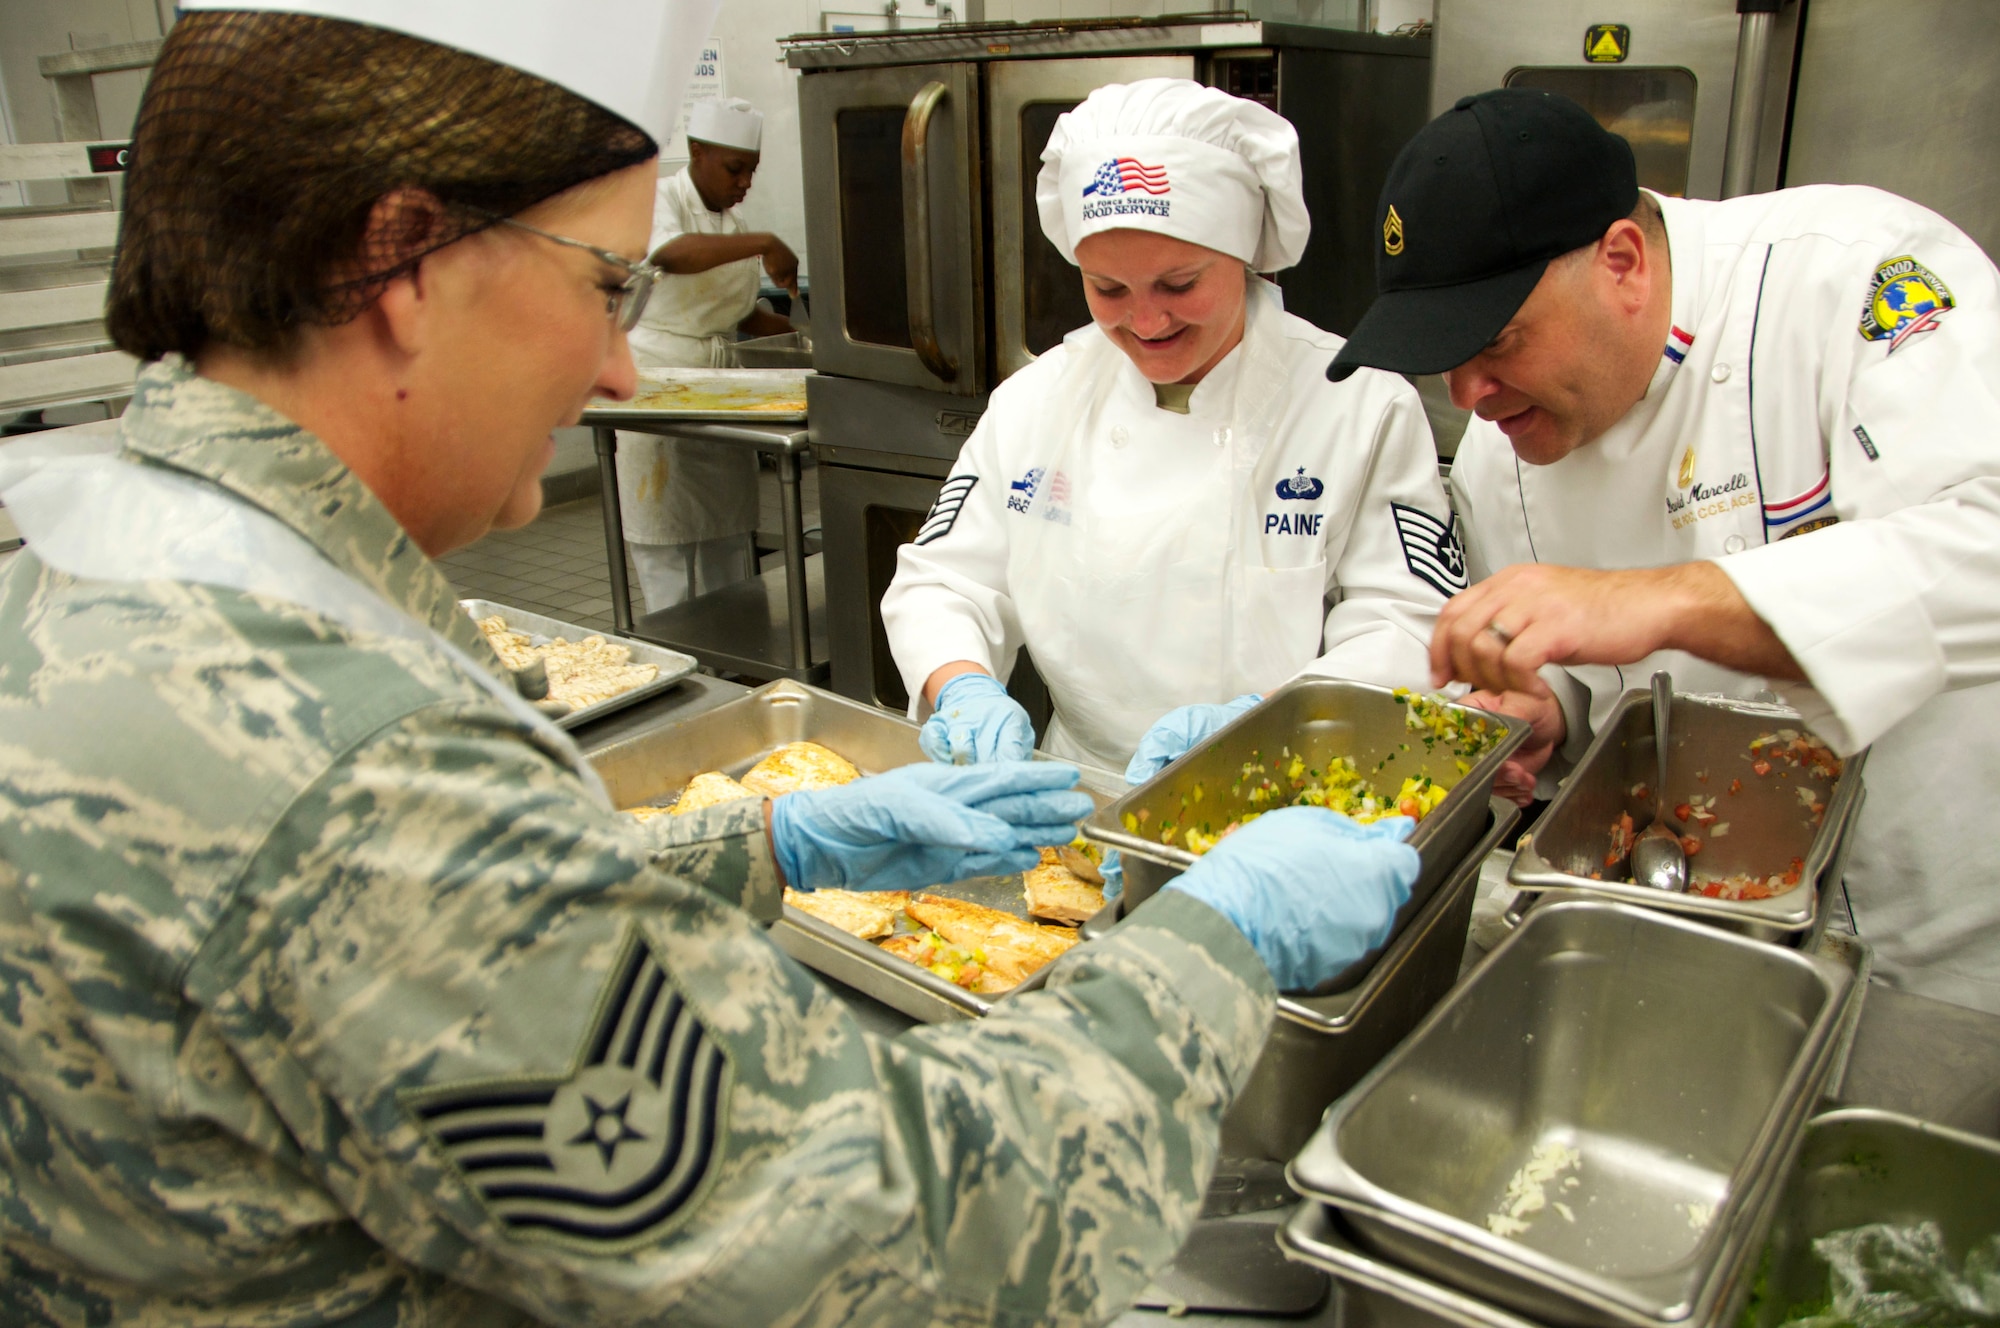 Technical Sergeants Toni Paine (center) and Stacey Macavinta (left), 419th Force Support Squadron, put the finishing touches on a meal with help from U.S. Army Sgt. First Class David Marcelli at Schofield Barracks, Hawaii. A group of 419th Fighter Wing reservists worked side by side with the seasoned chef during their two-week annual tour training, honing their skills and learning new techniques. Marcelli is head cook at Schofield Barracks and former executive chef at the Rock & Roll Hall of Fame in Cleveland, Ohio. (U.S. Air Force photo/Staff Sgt. Christina Judd)